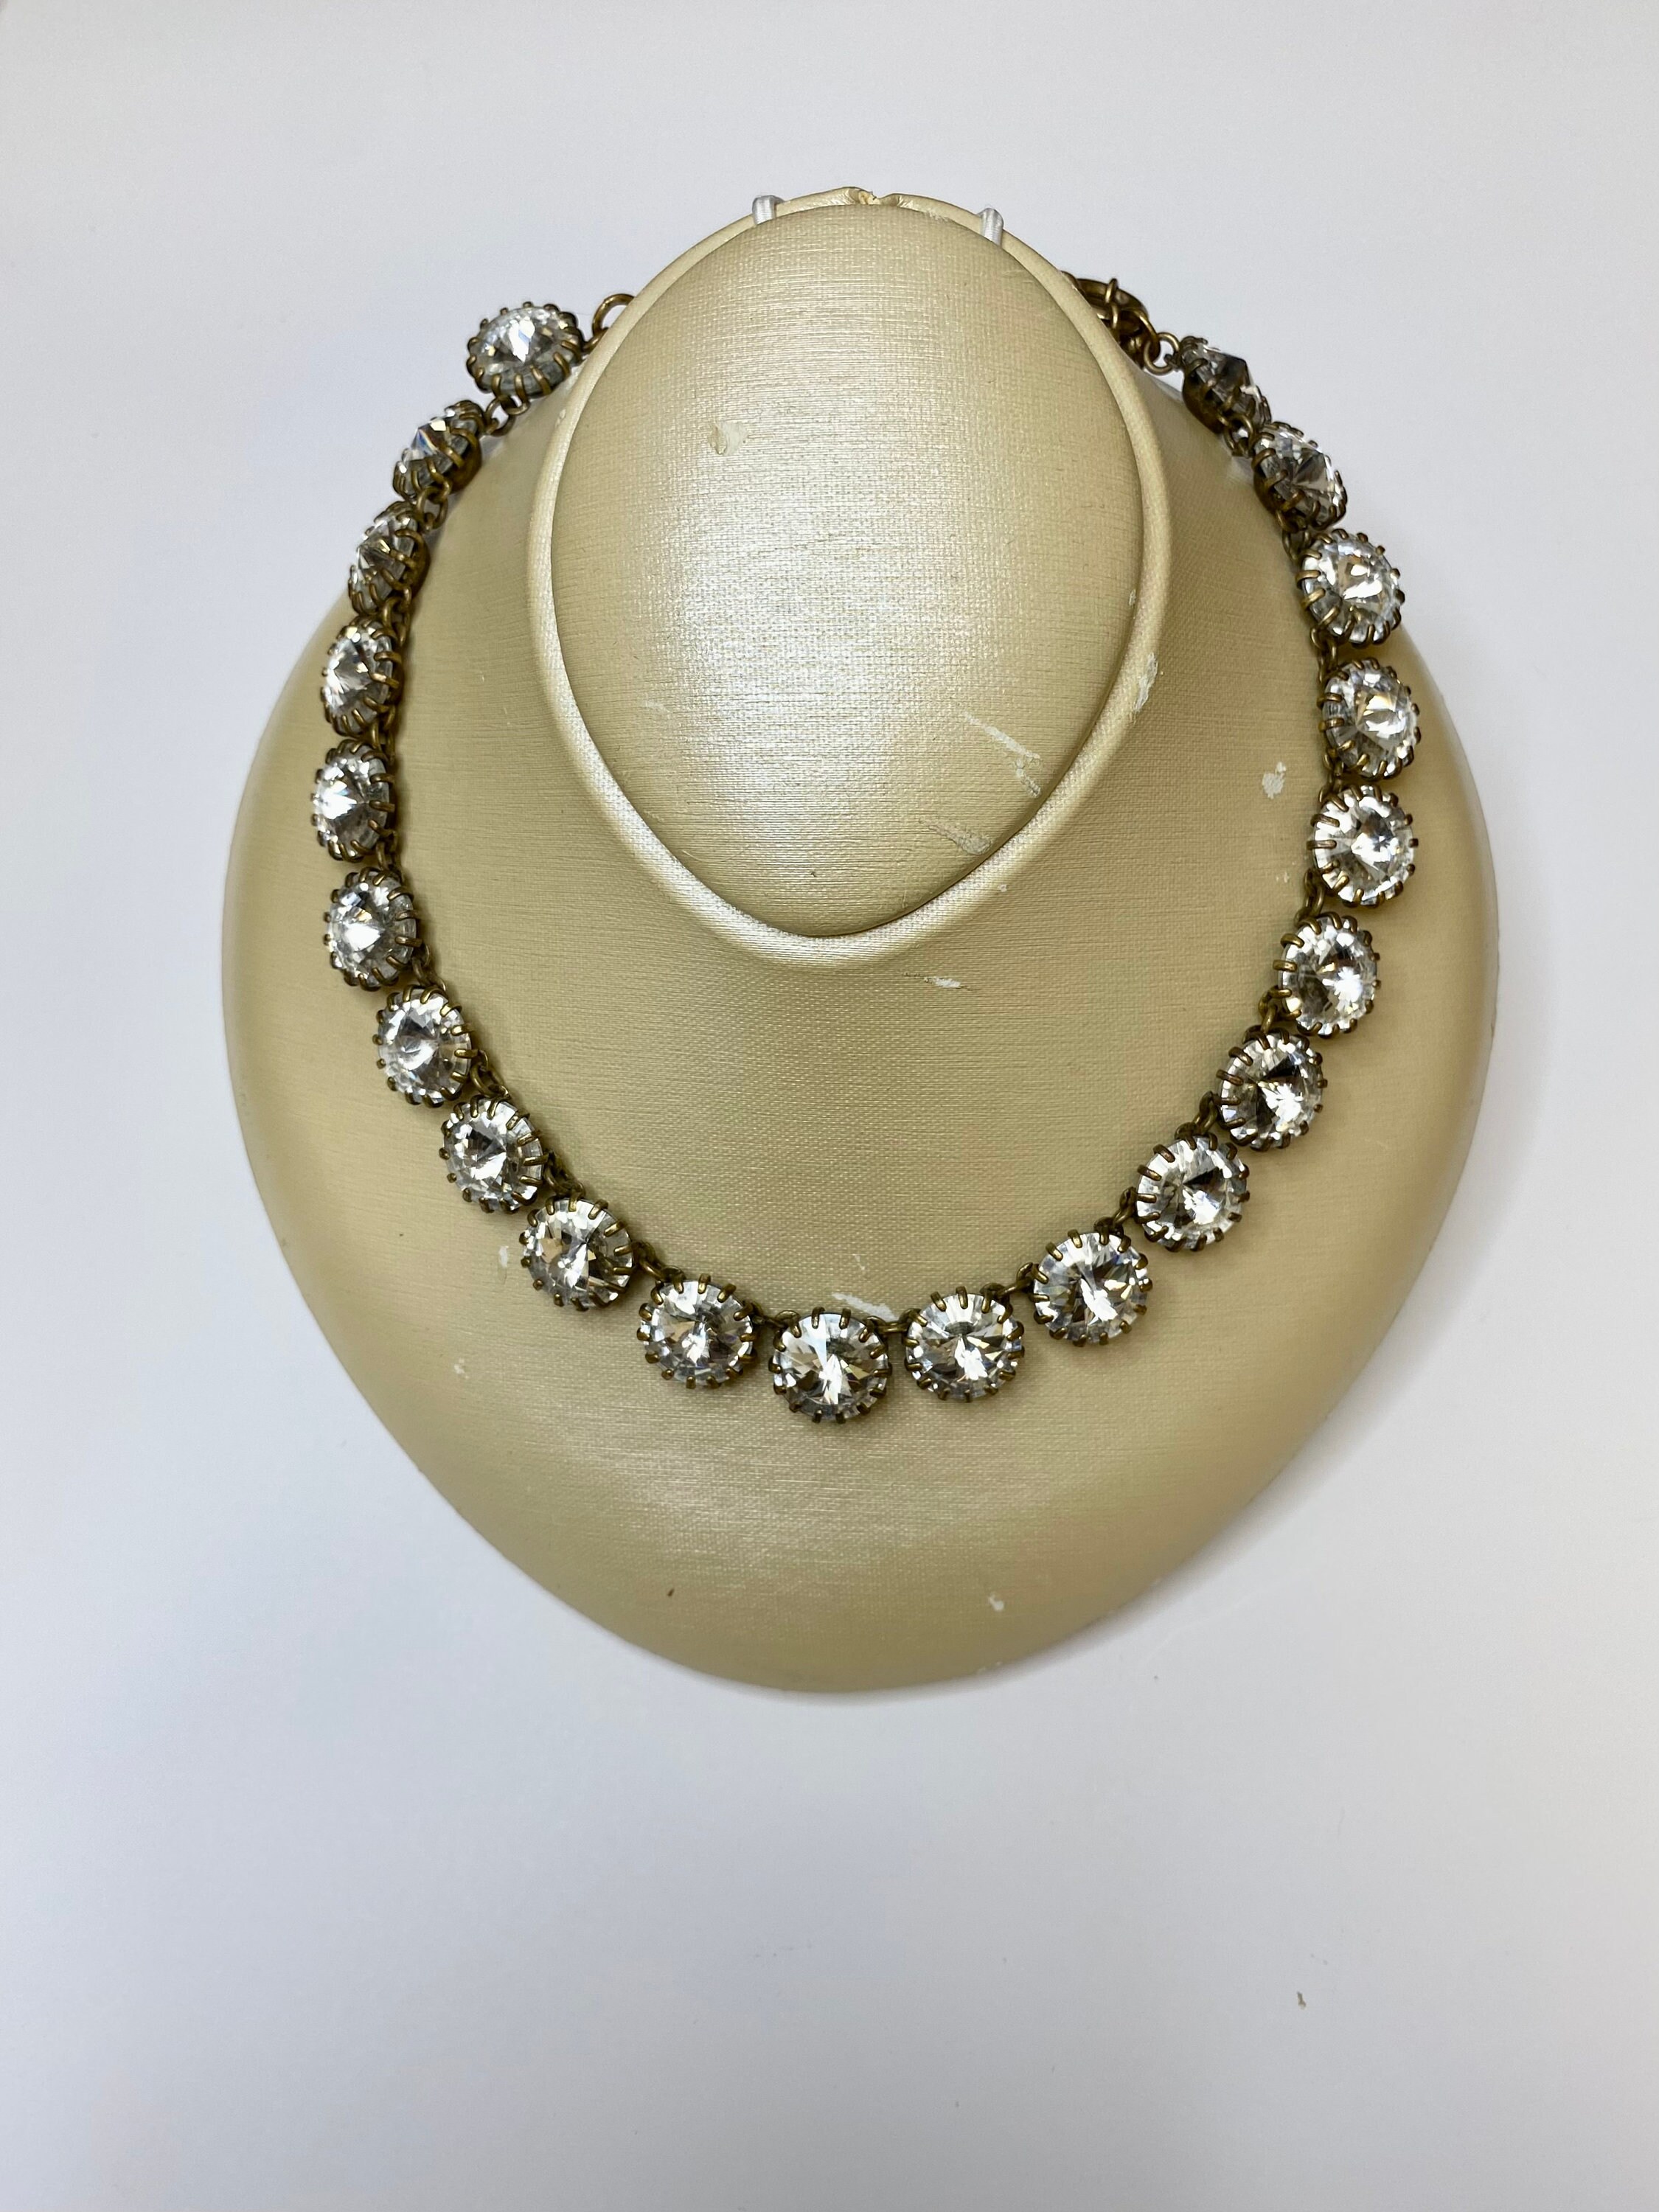 Sparkling Clear Crystal Collar Statement Cocktail Necklace - Etsy